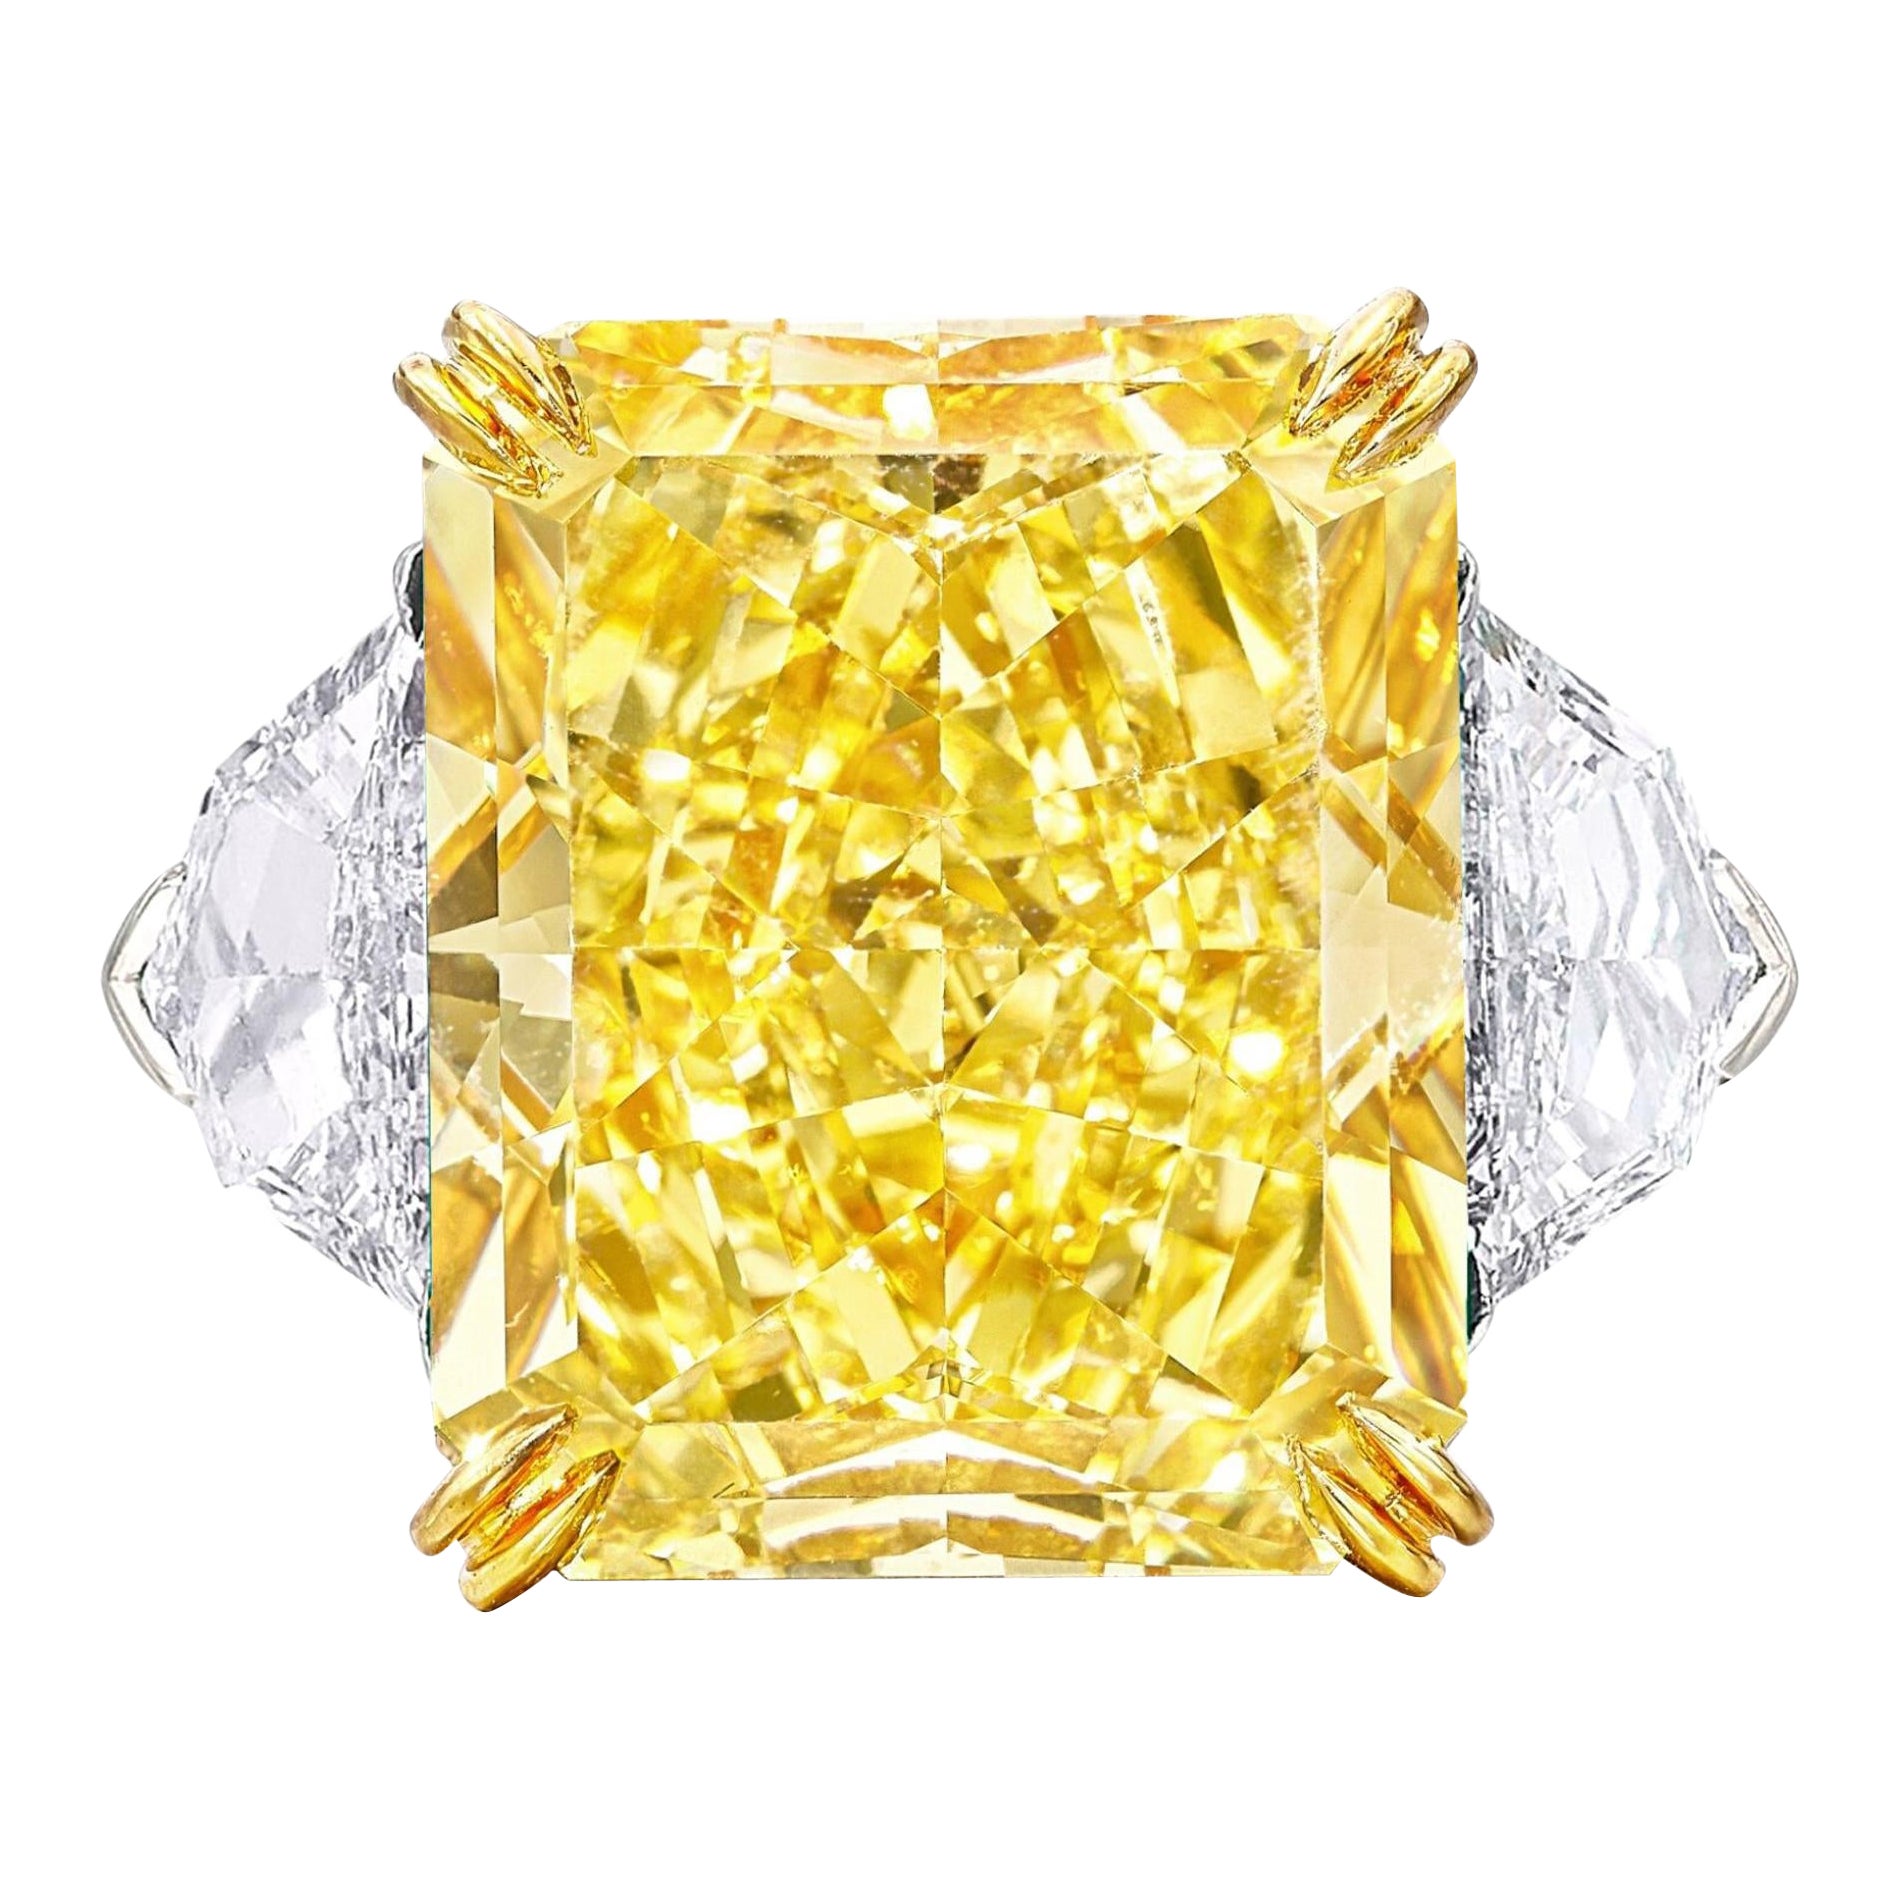 Exceptional GIA Certified 10.88 Carat Fancy Yellow Diamond Ring